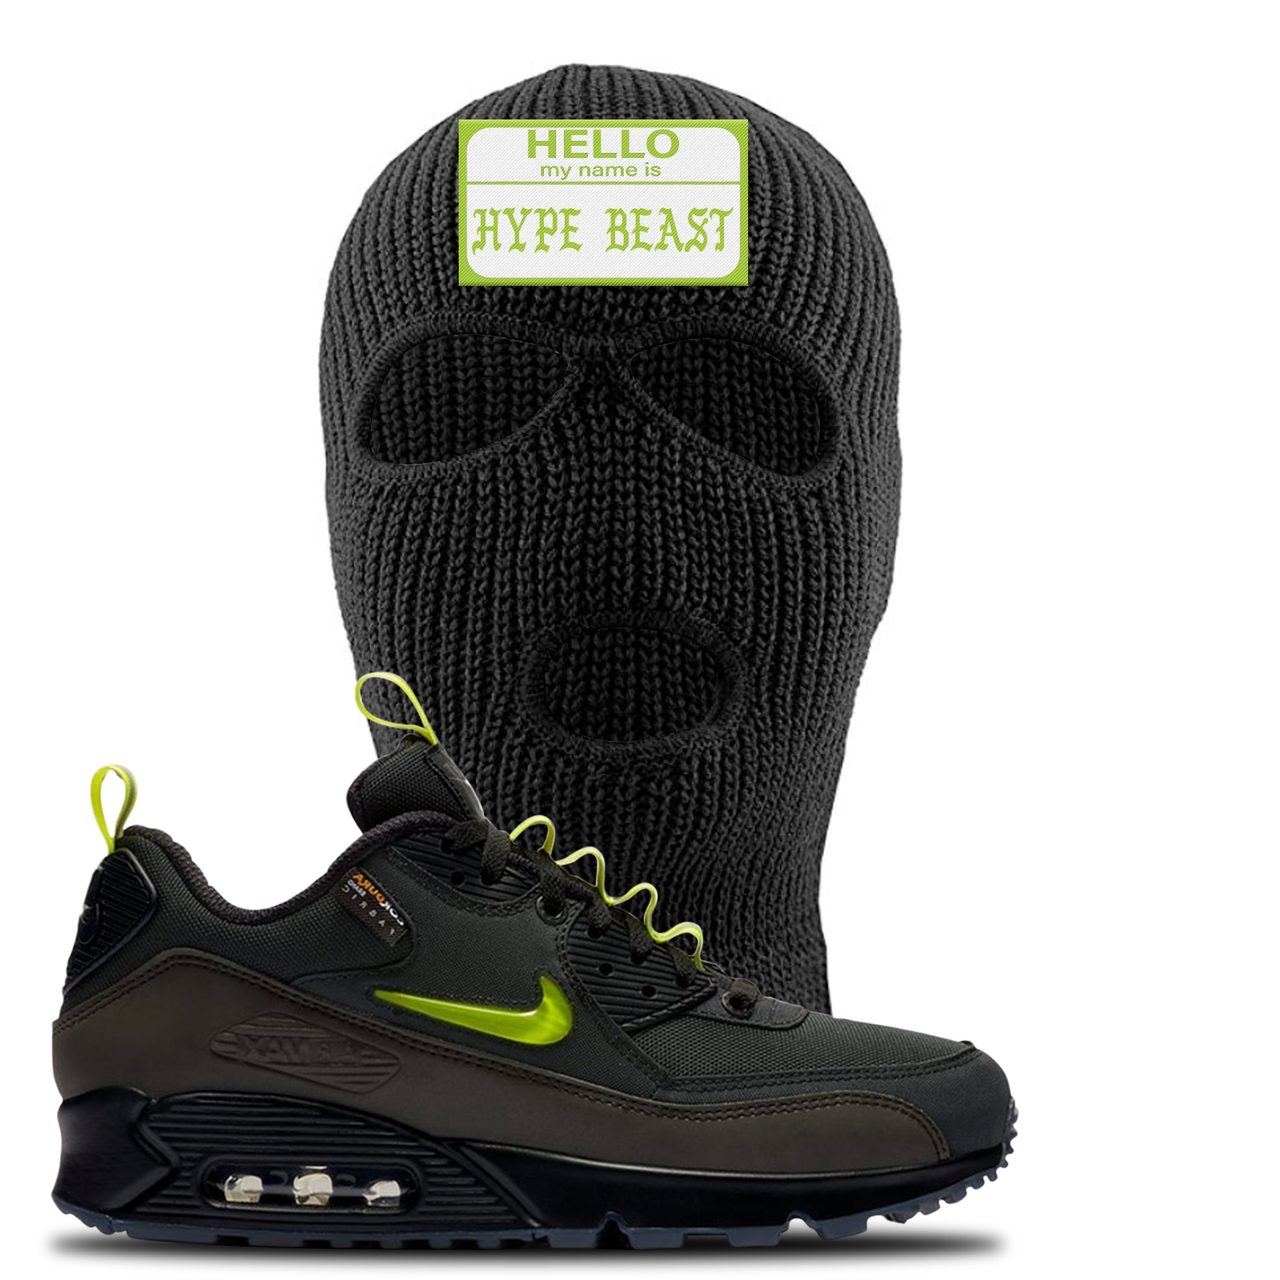 The Basement X Air Max 90 Manchester Hello My Name is Hype Beast Black Sneaker Hook Up Ski Mask